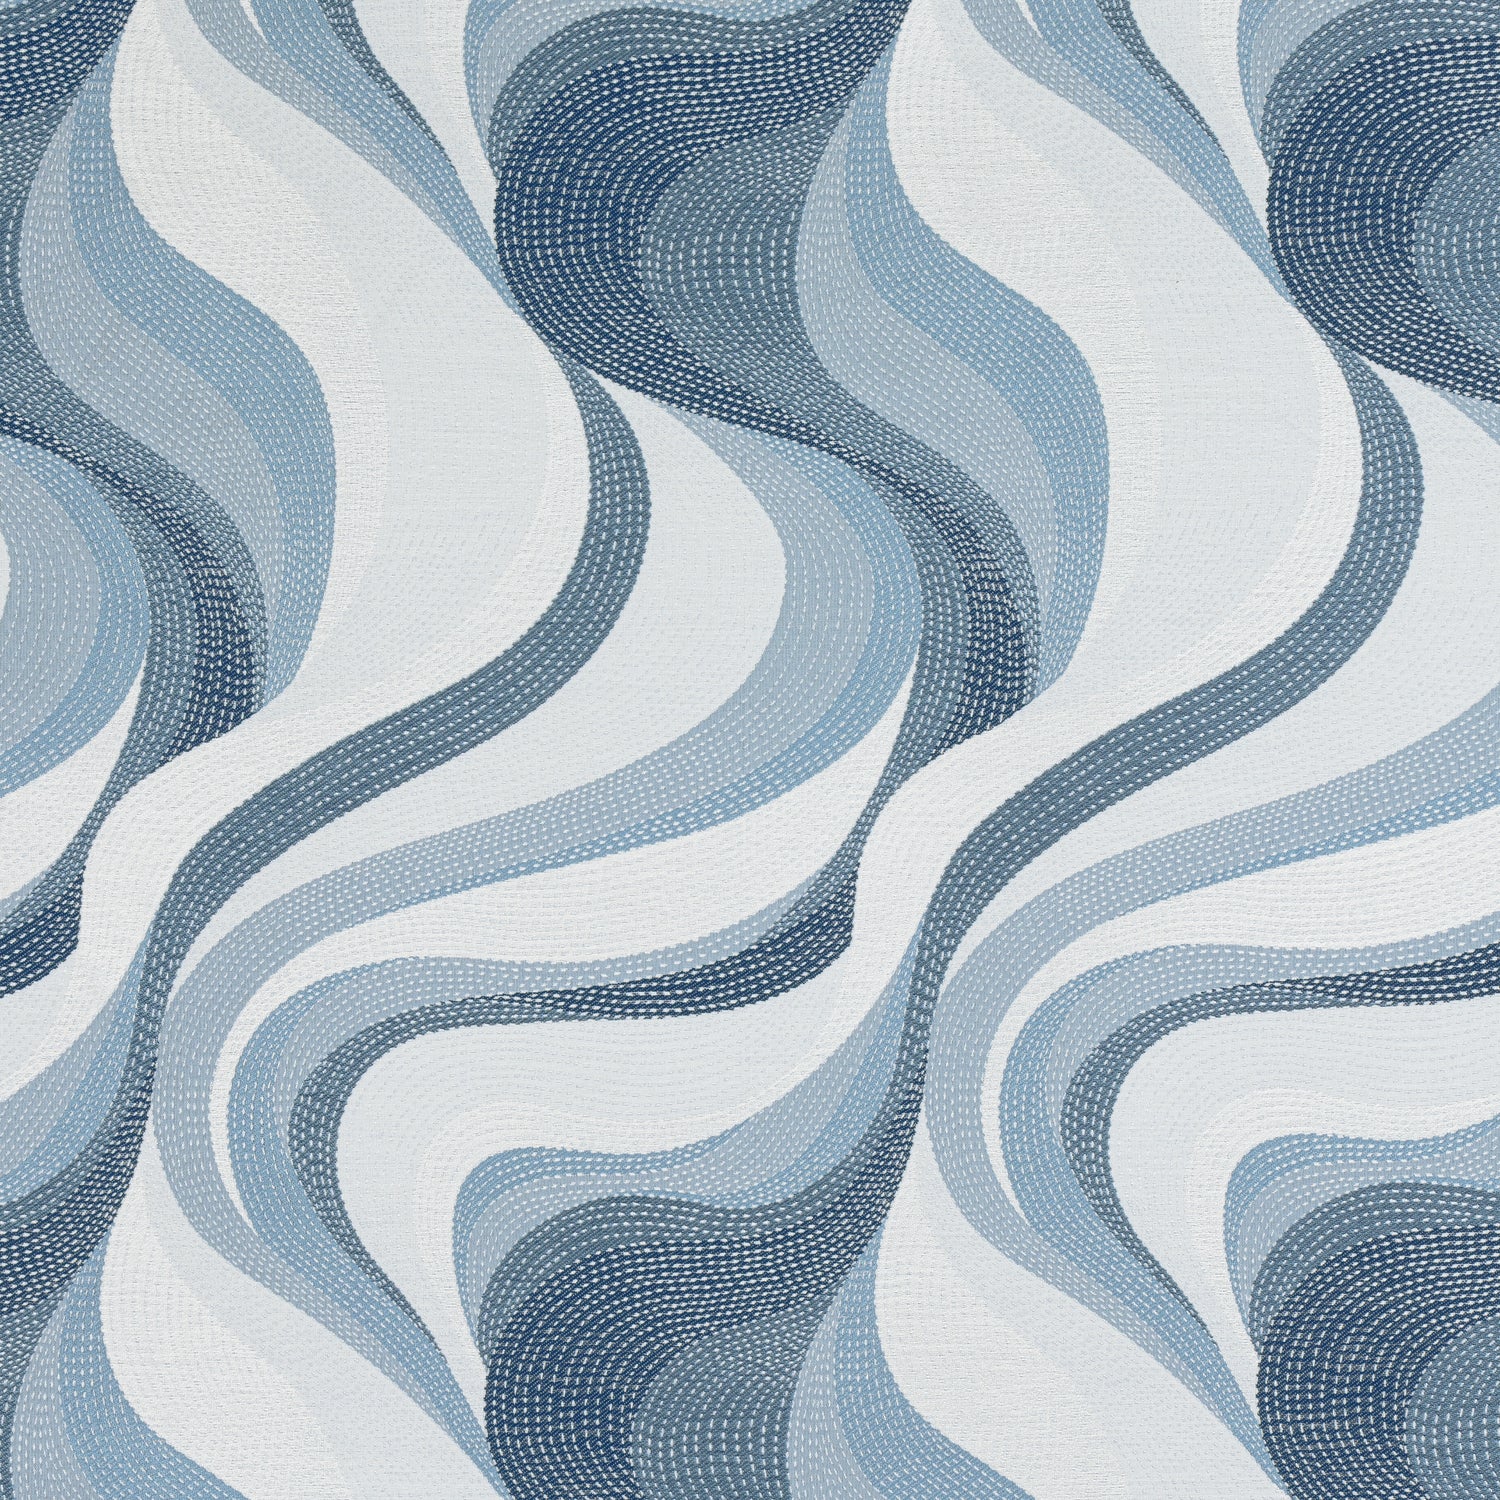 Passage fabric in waterfall color - pattern number W74203 - by Thibaut in the Passage collection